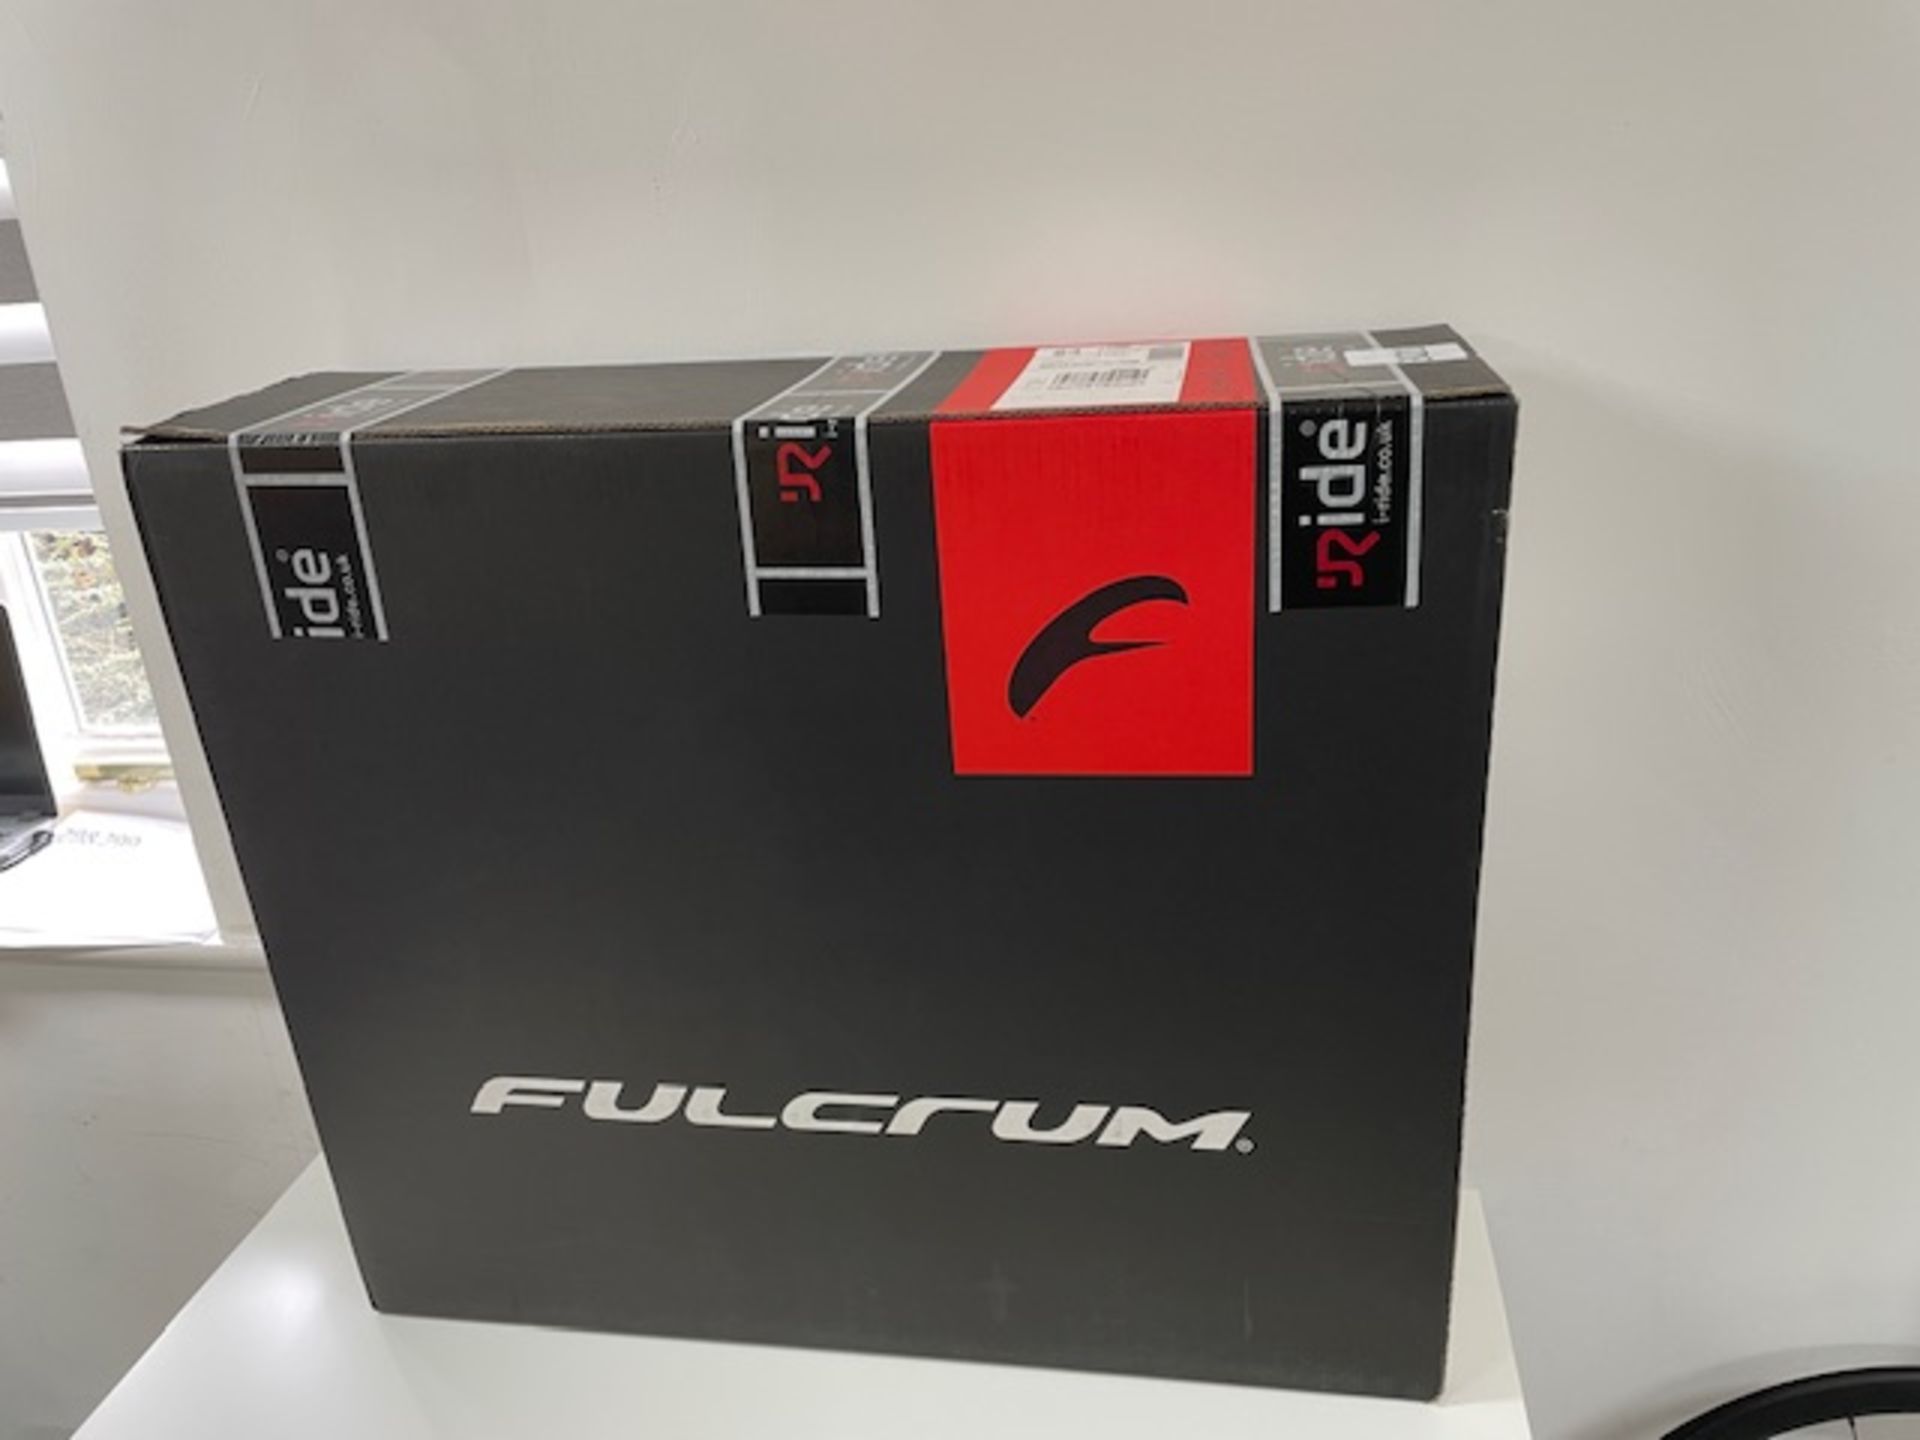 Pair Fulcrum “Wind 40” Carbon Disc Wheels, 700c with Freehub HG11 (Location: Newport Pagnell. Please